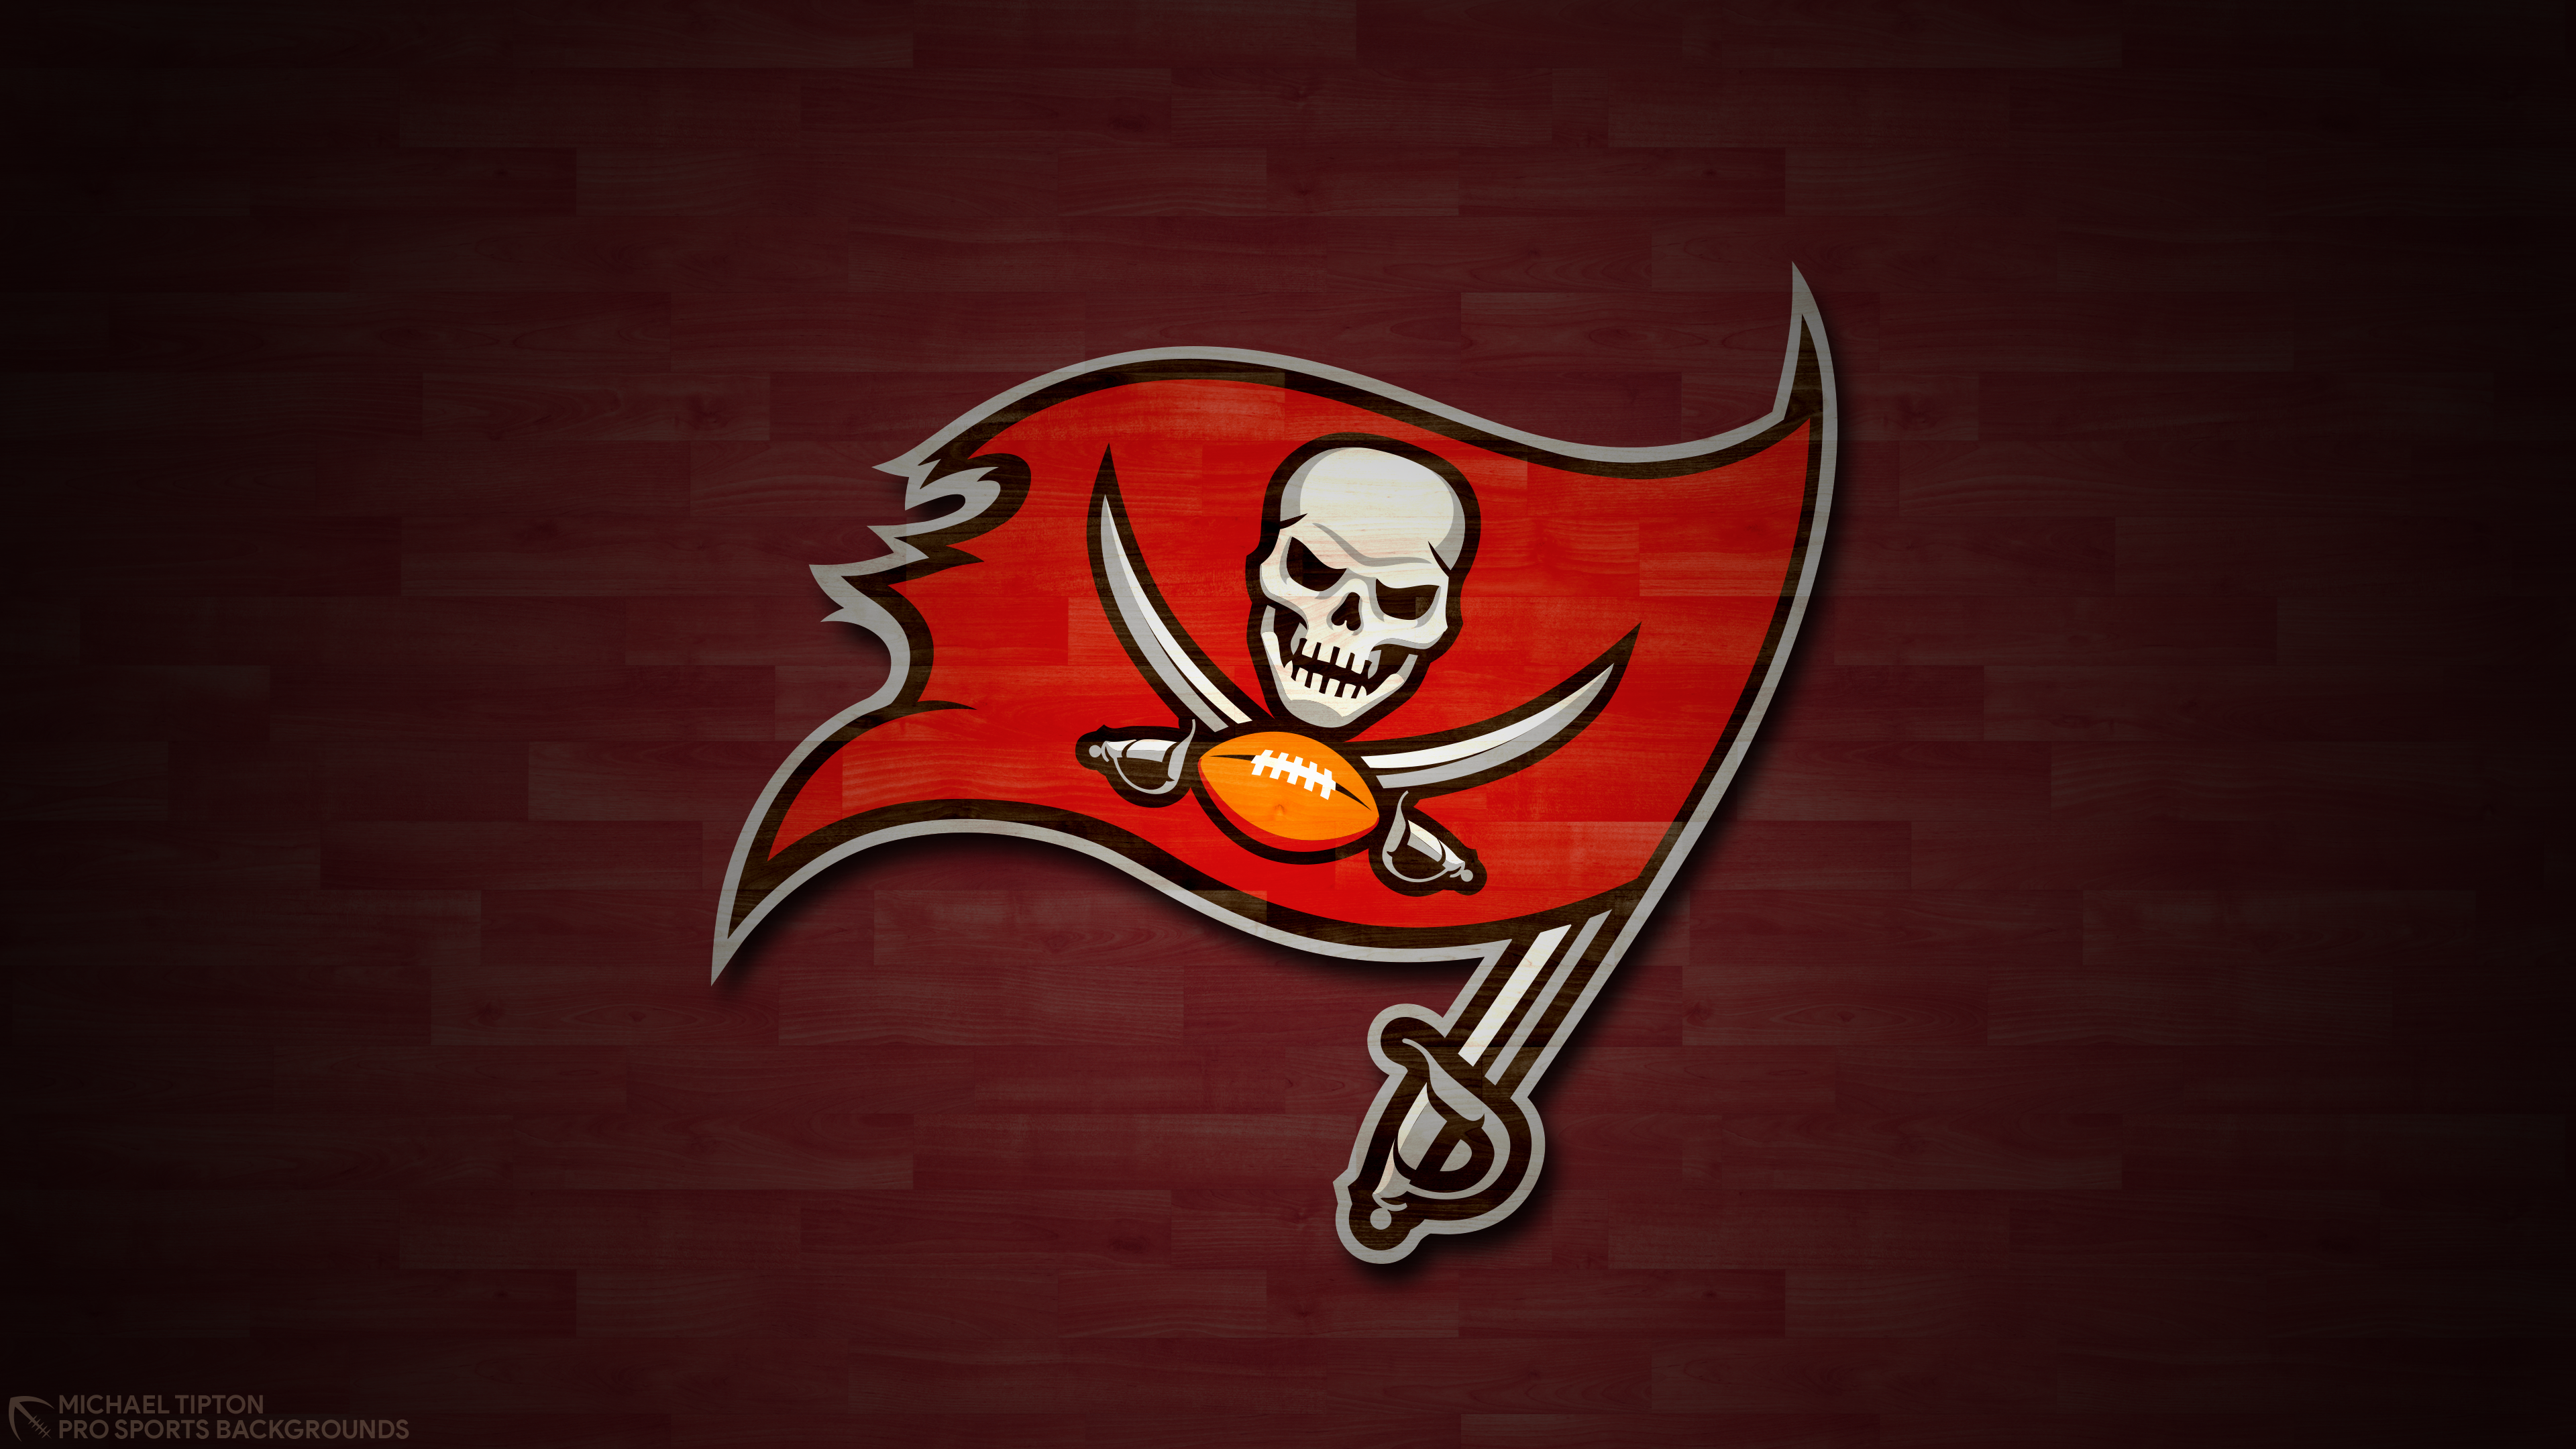 2022 Tampa Bay Buccaneers Wallpaper. Pro Sports Background